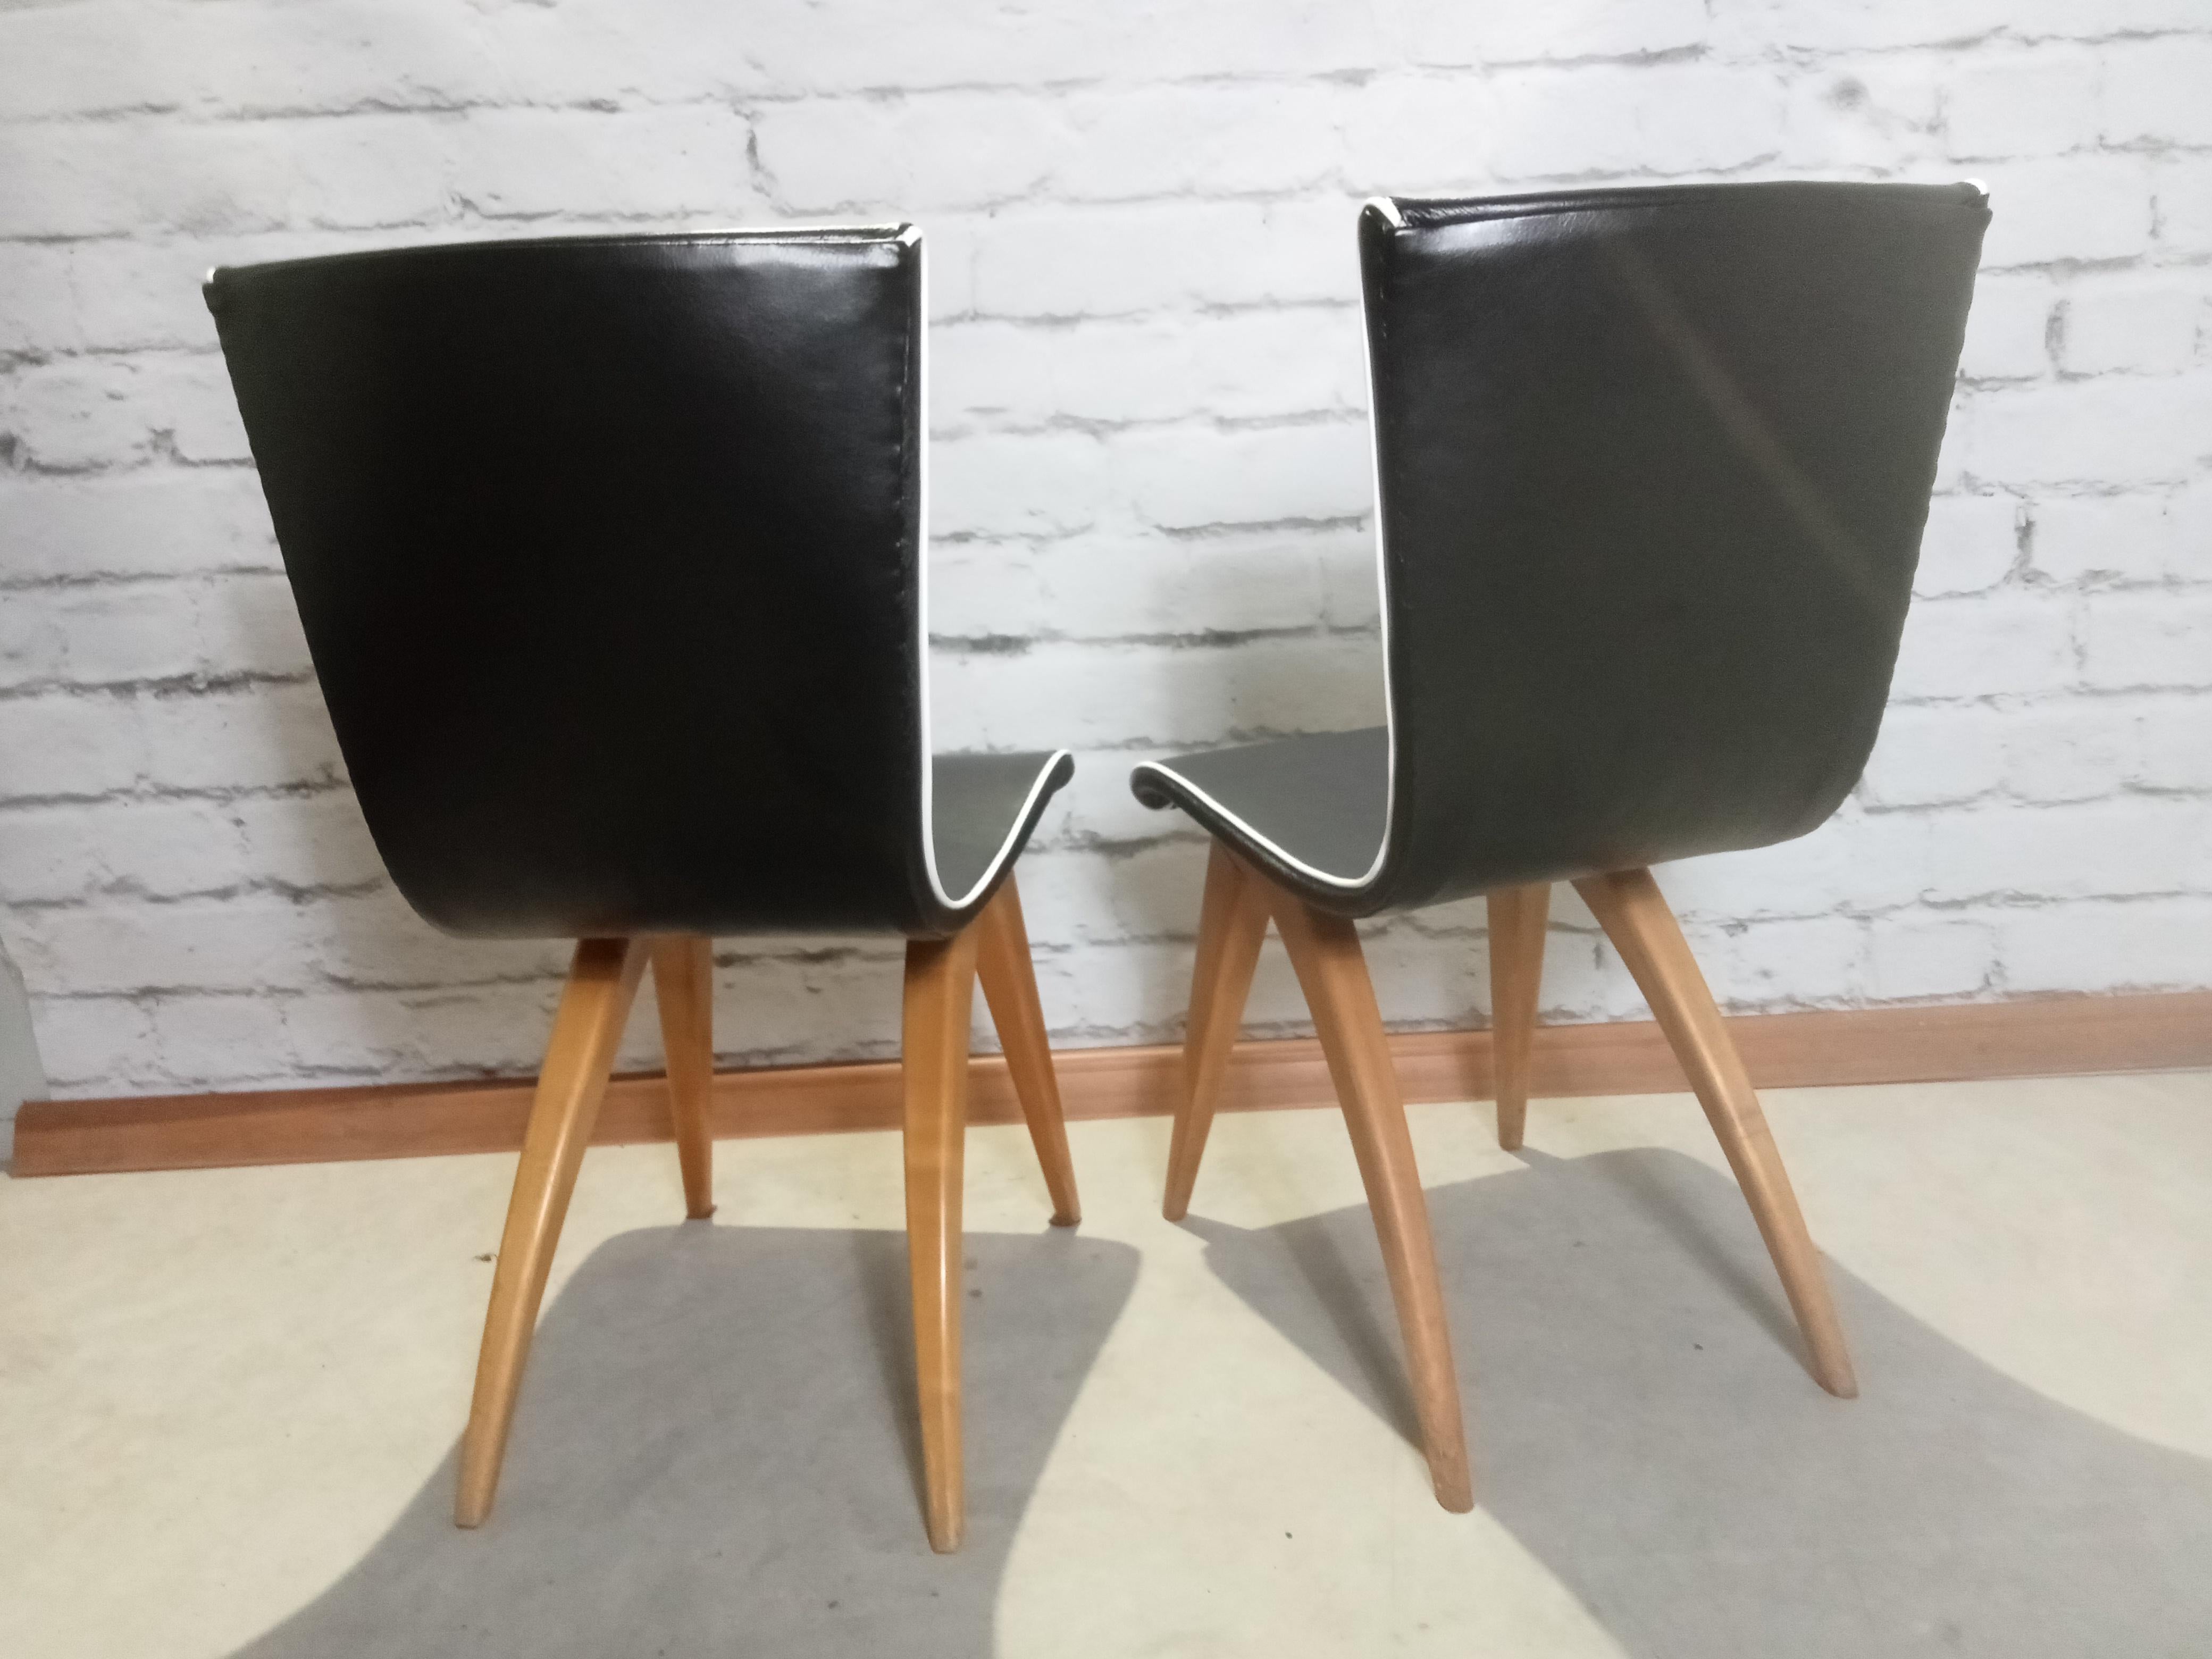 Mid-20th Century Swing Dining Chairs by G.J. Van Os for Van Os Culemborg, 1950's For Sale